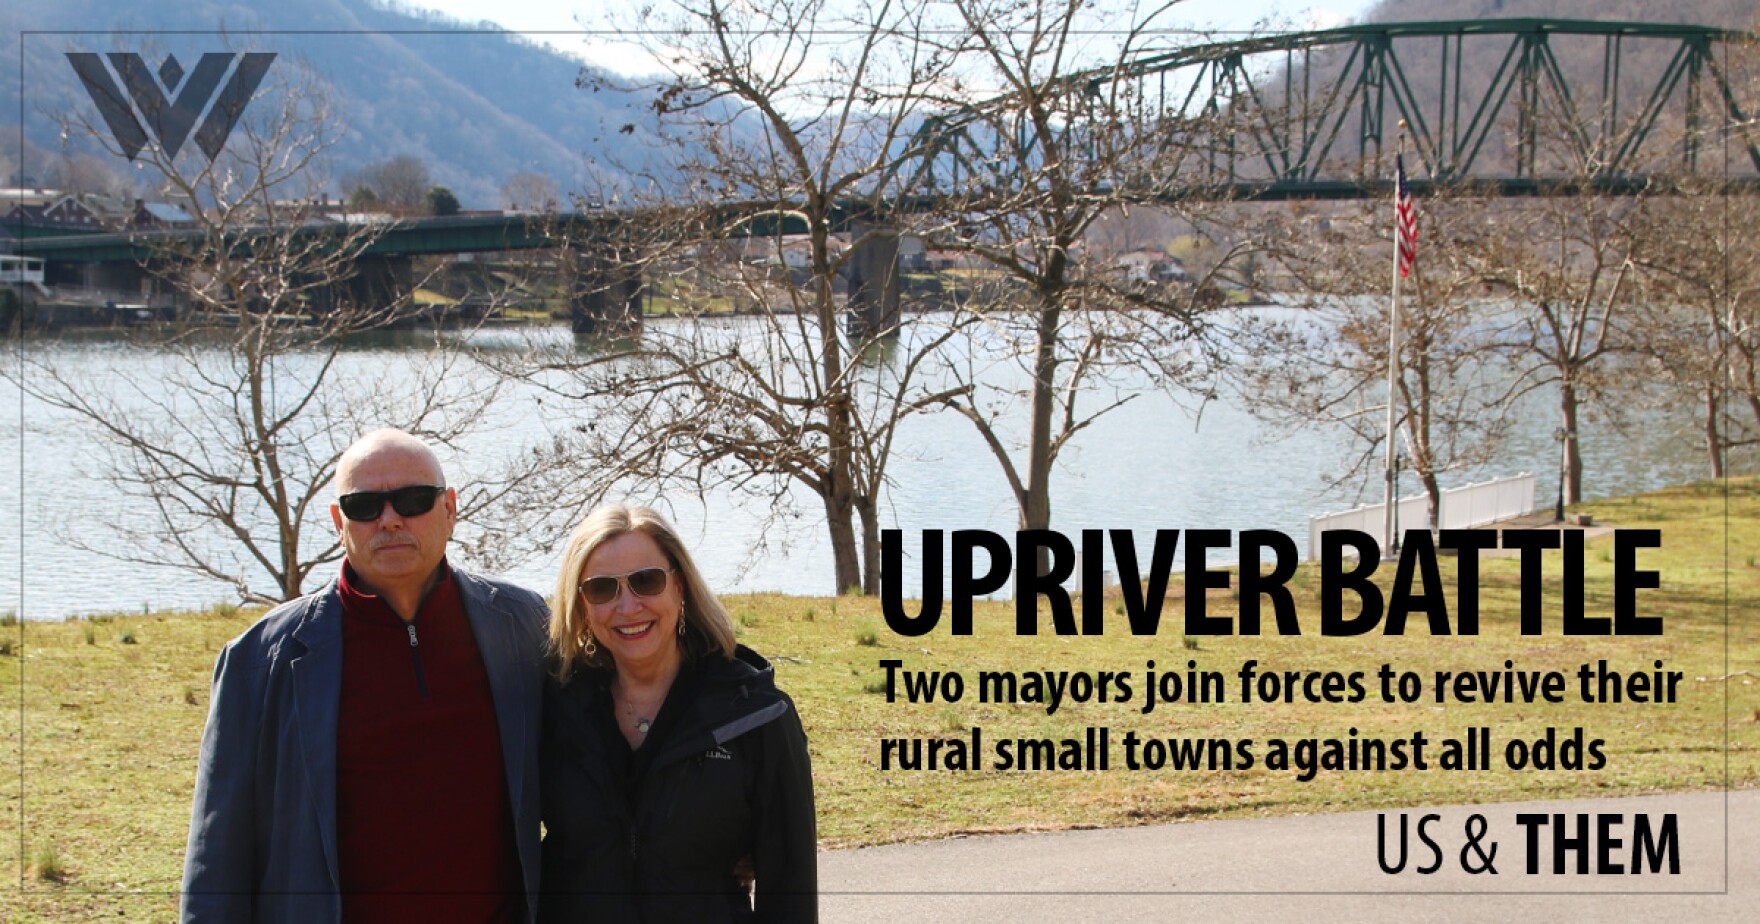 Upriver Battle: Two Mayors Join Forces to Revive Their Rural Small Towns Against All Odds